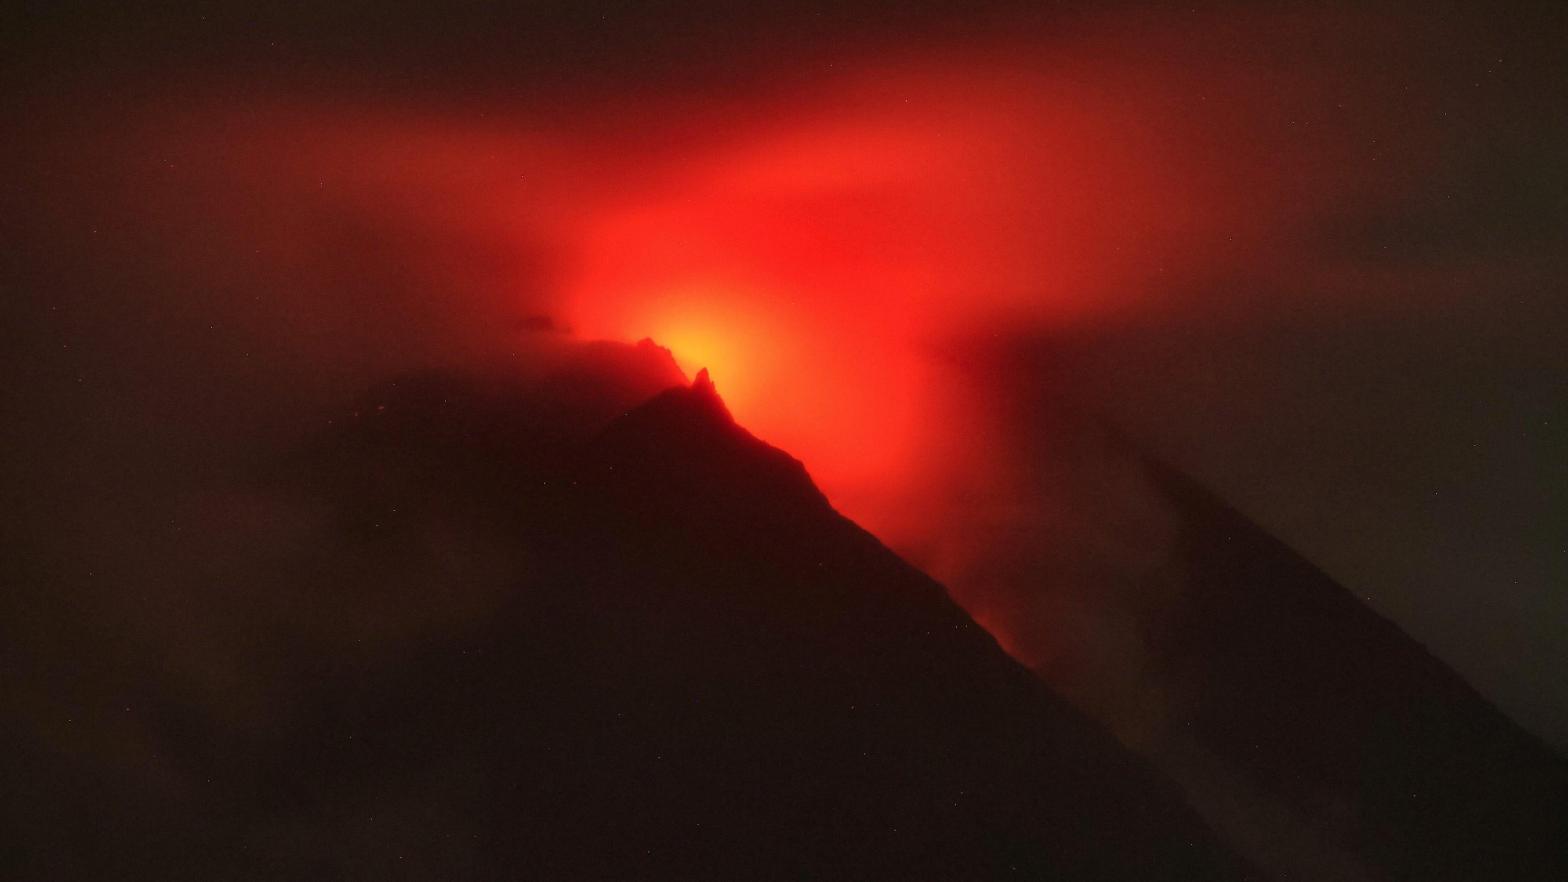 Lava flows from Indonesia's Mount Merapi on March 10. (Photo: DEVI RAHMAN/AFP, Getty Images)